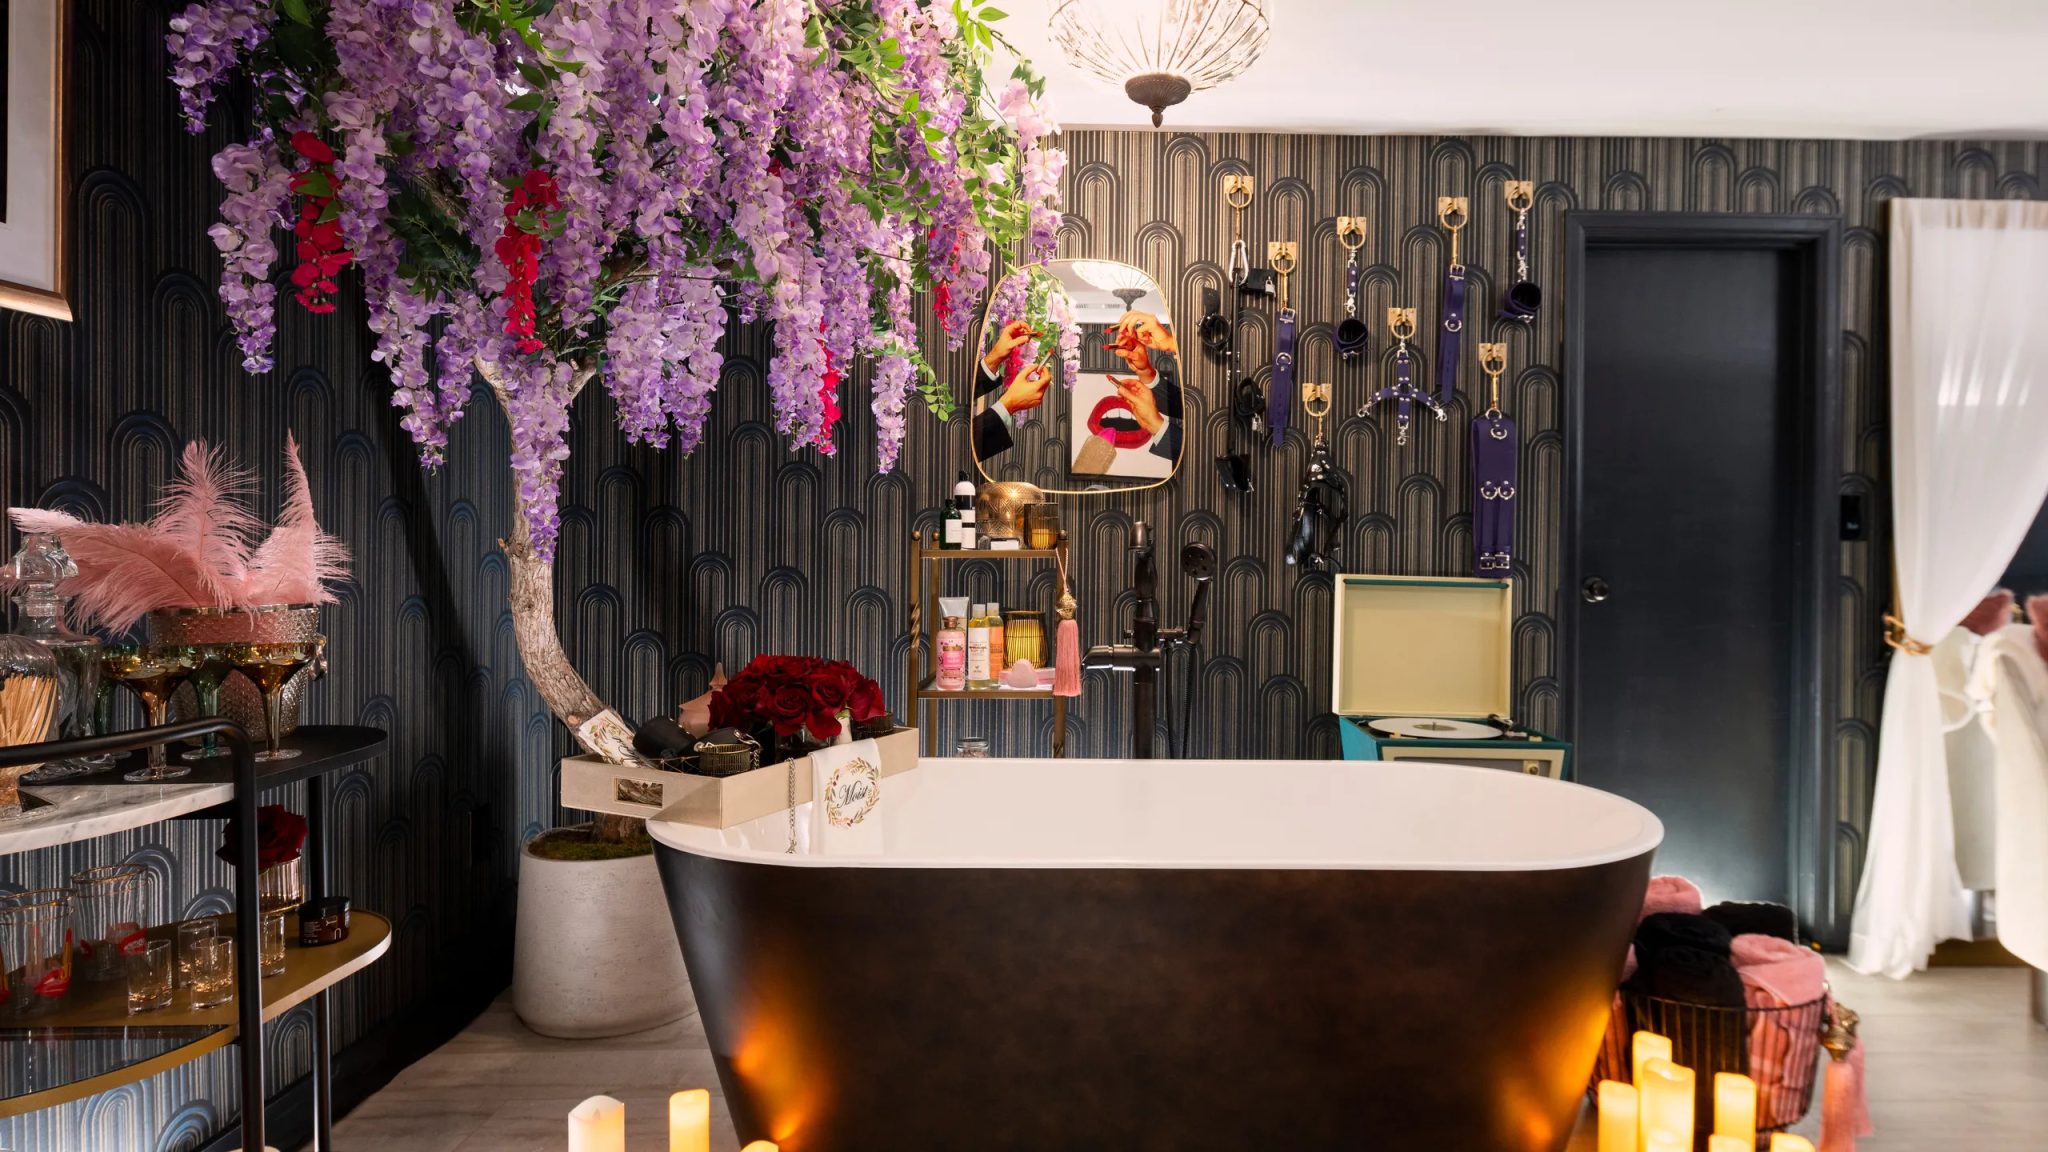 luxury glamour space with textured wallpaper, full bathtub and greenery